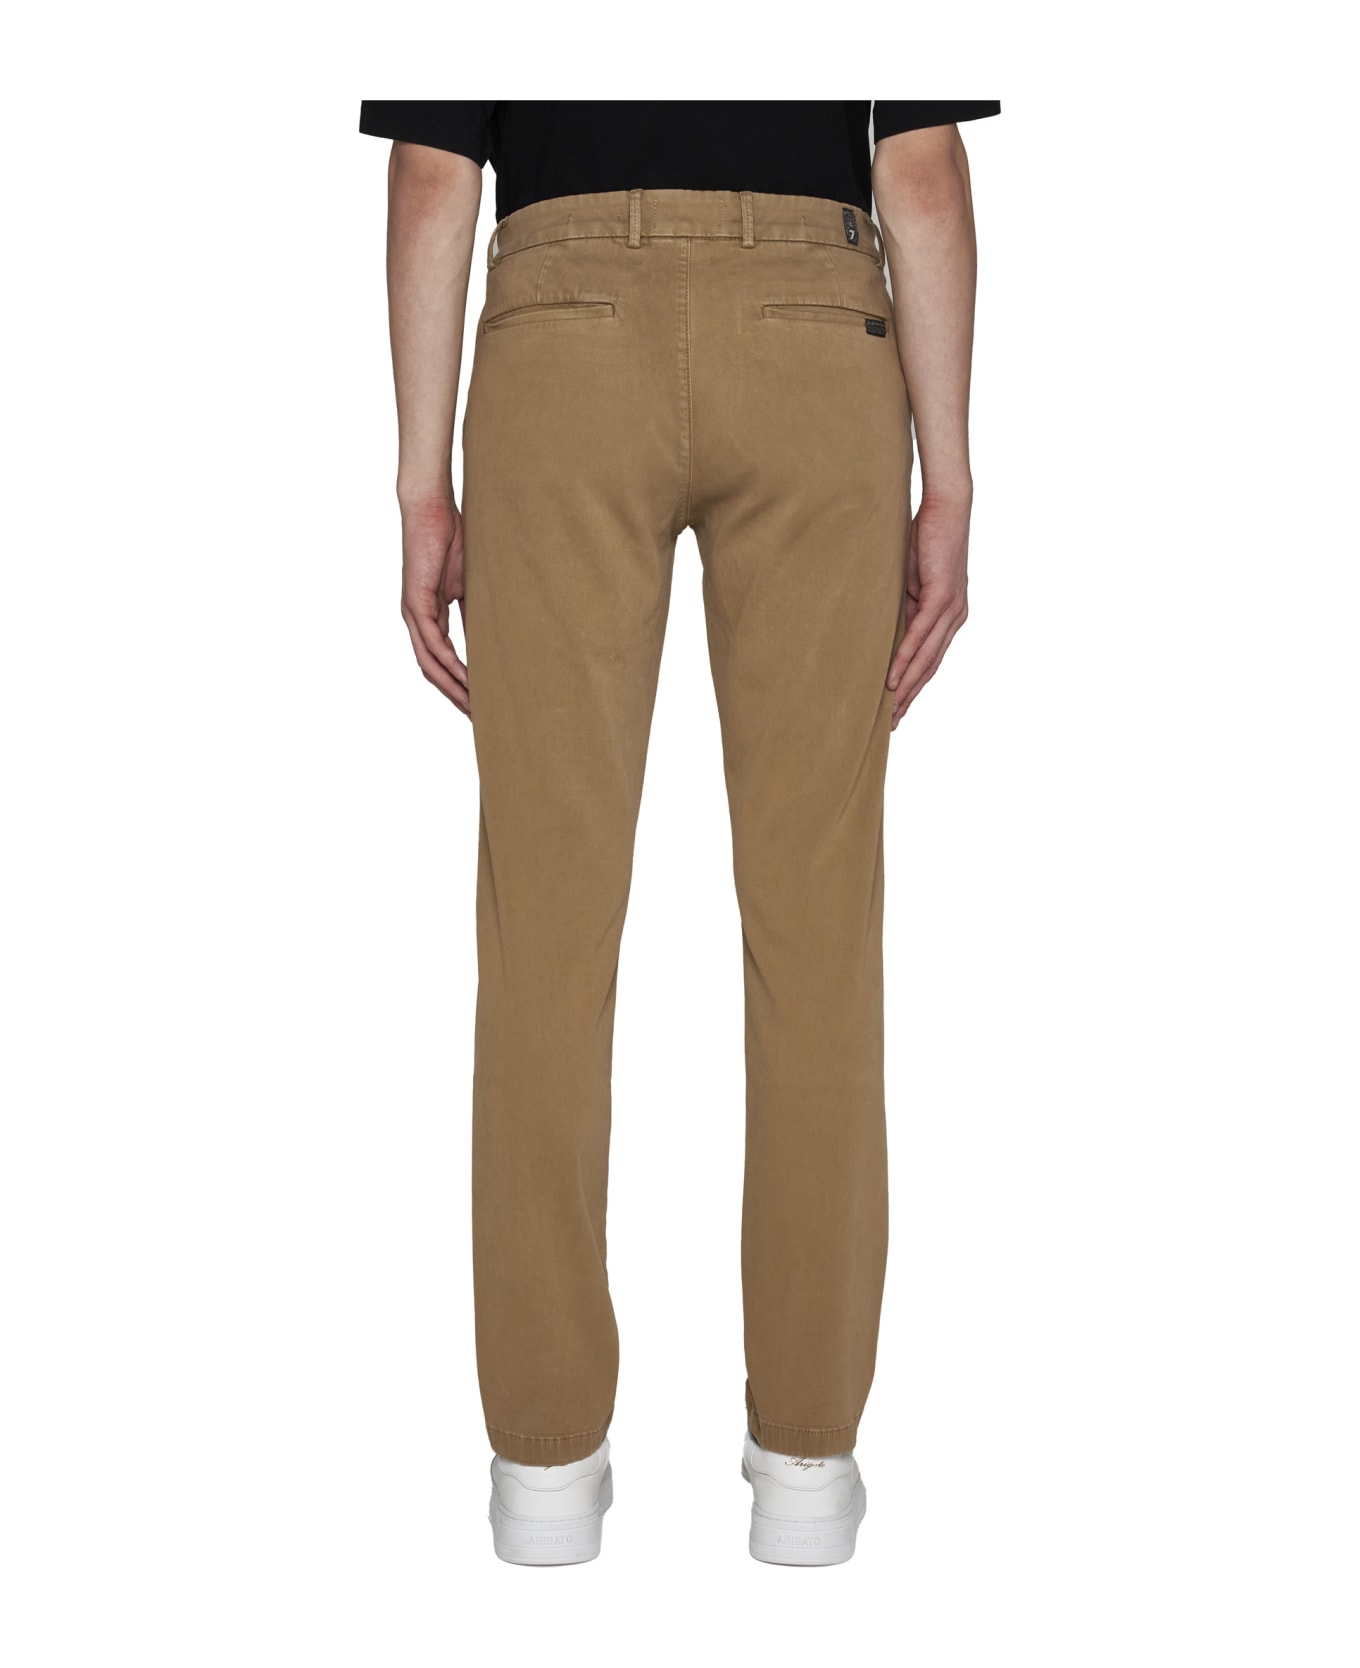 7 For All Mankind Jeans - Beige